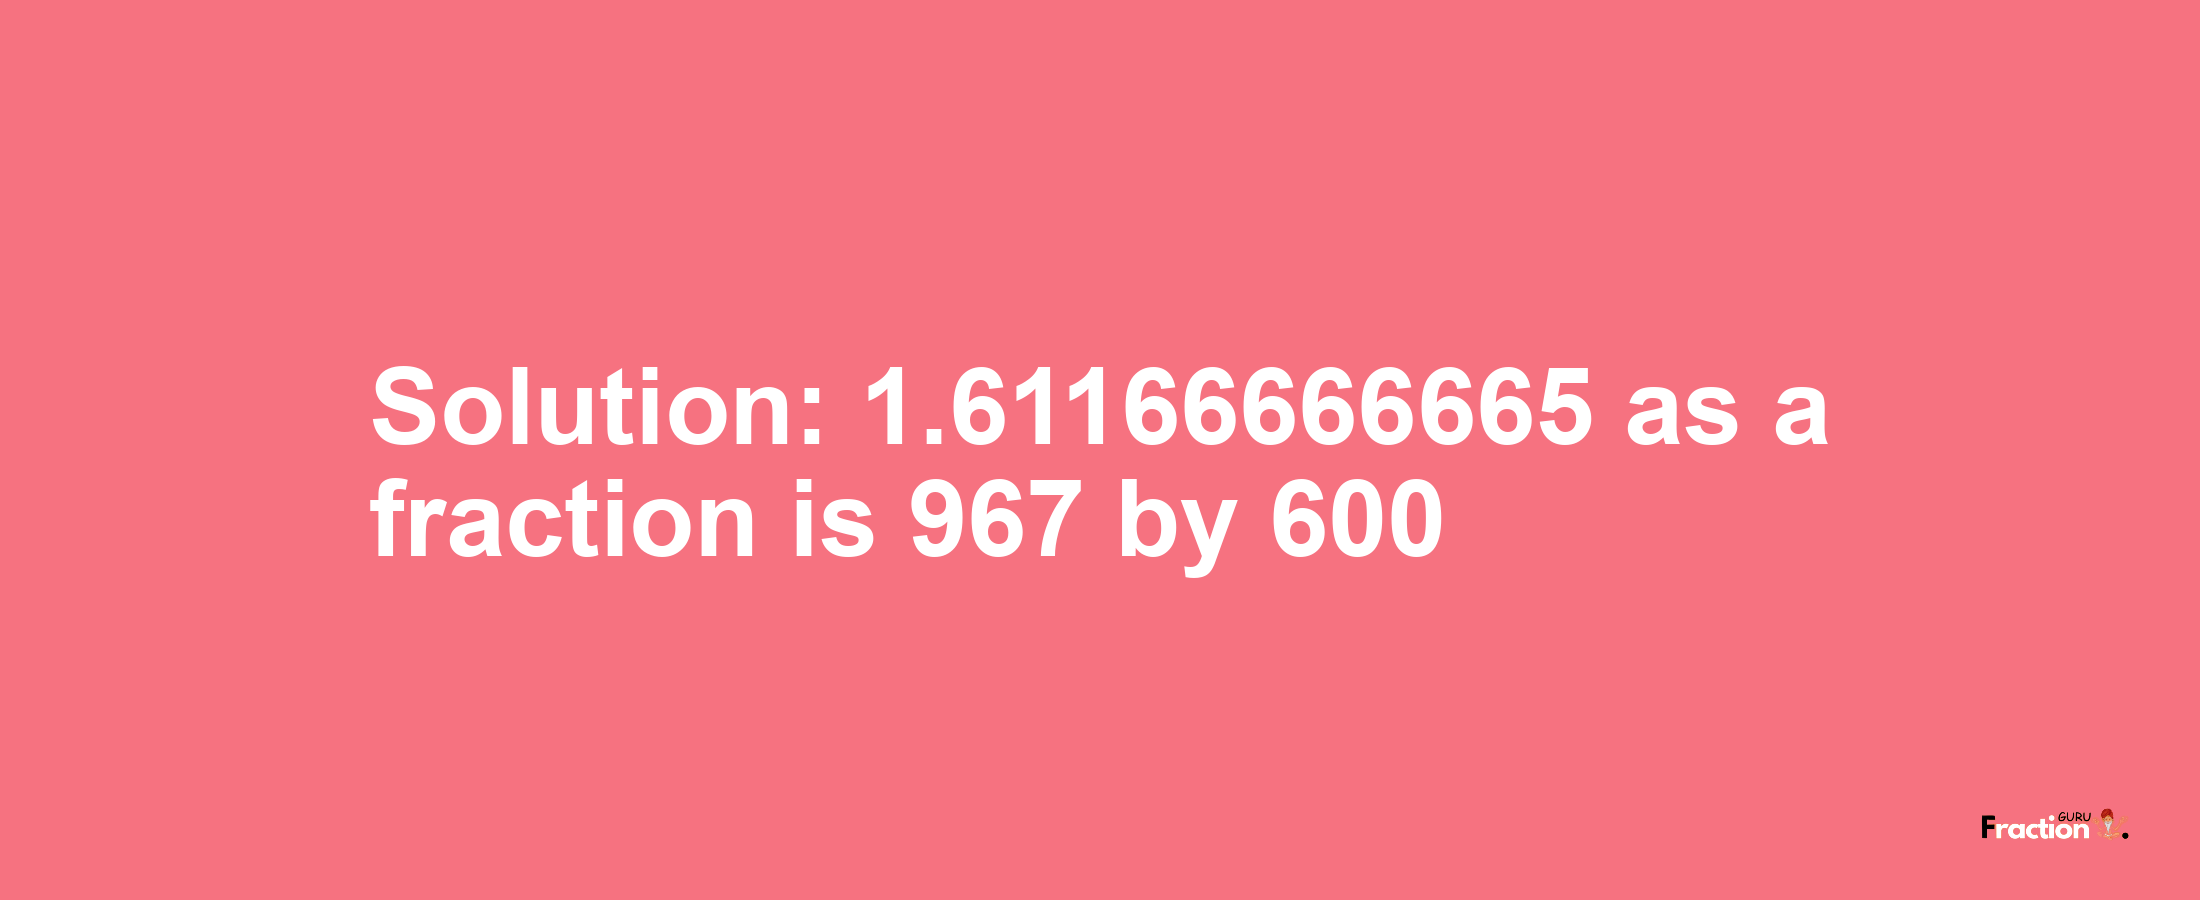 Solution:1.61166666665 as a fraction is 967/600